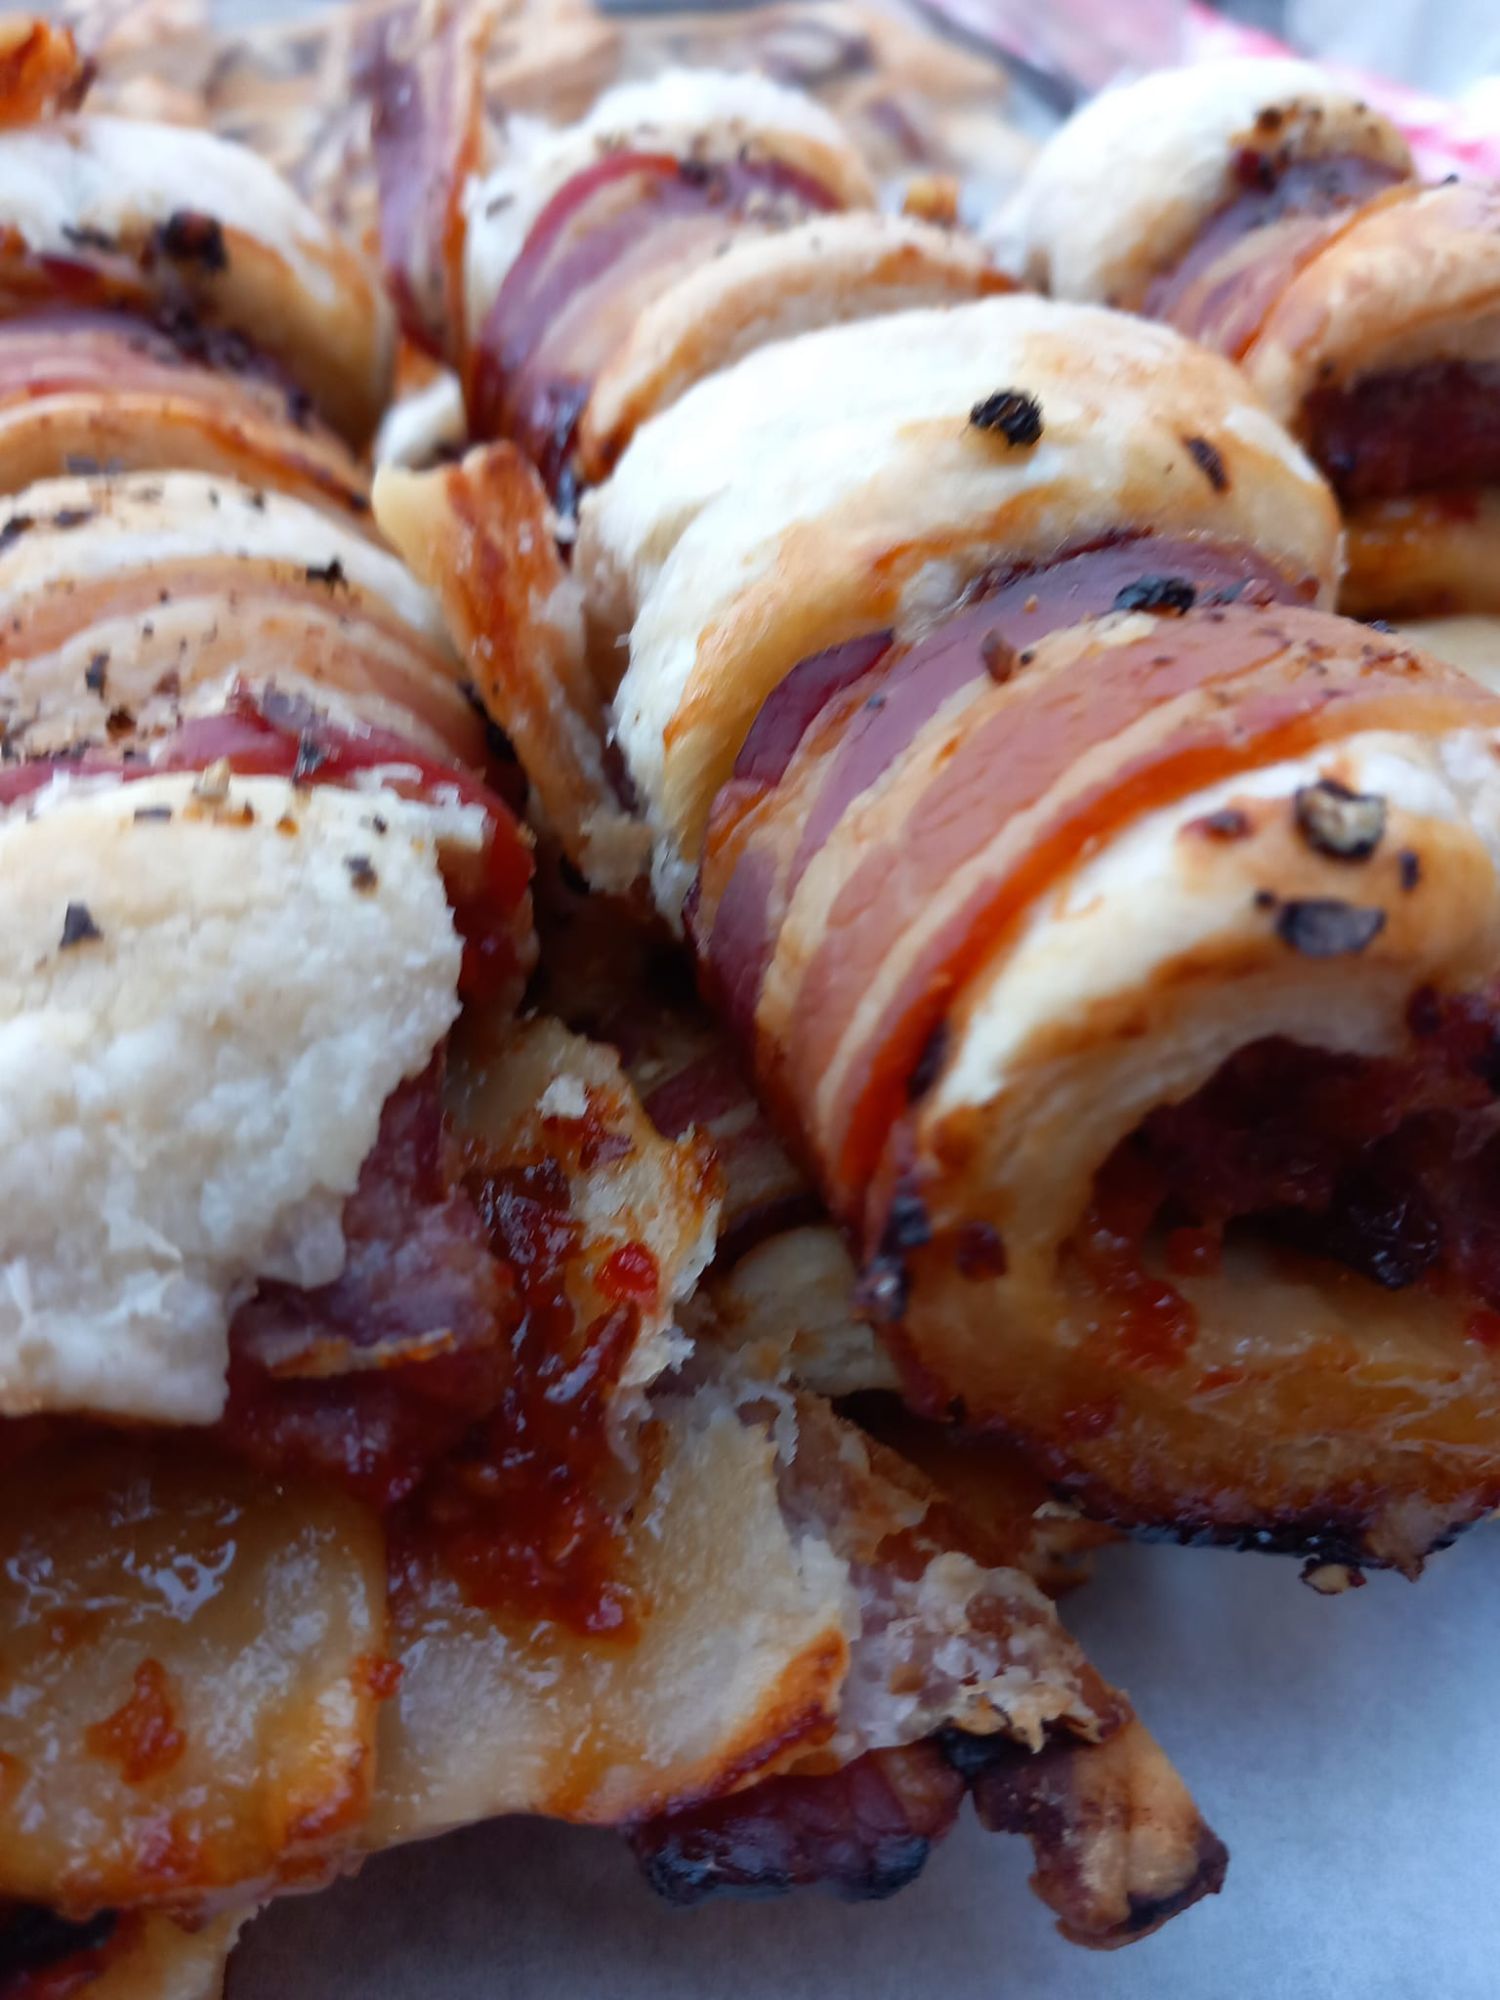 Sausage rolls wrapped in bacon at the Starting gate Beer festival